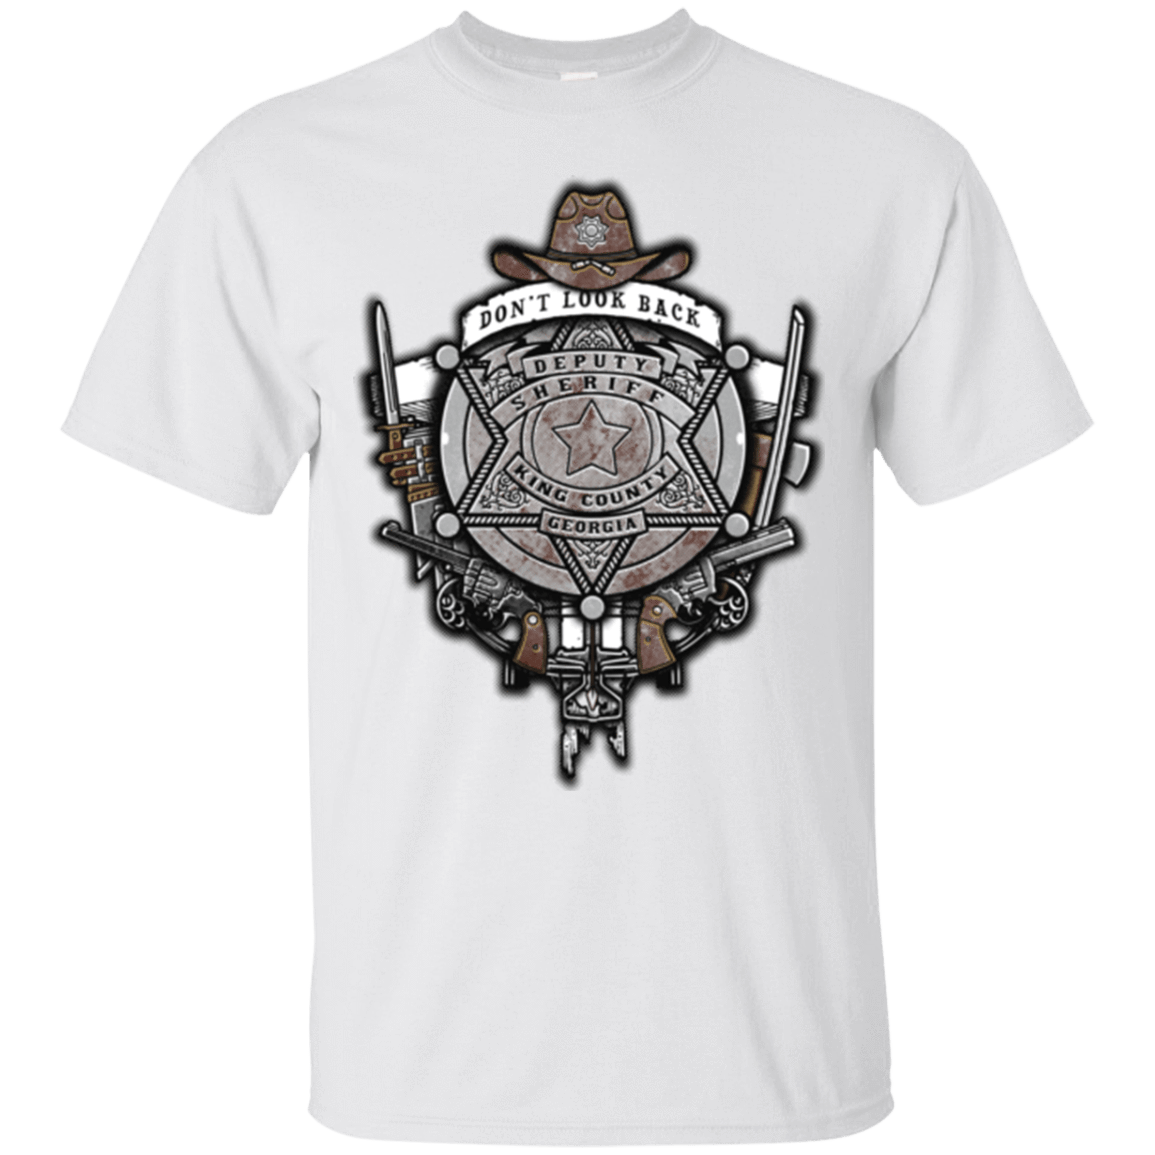 T-Shirts White / Small The Walking Crest T-Shirt